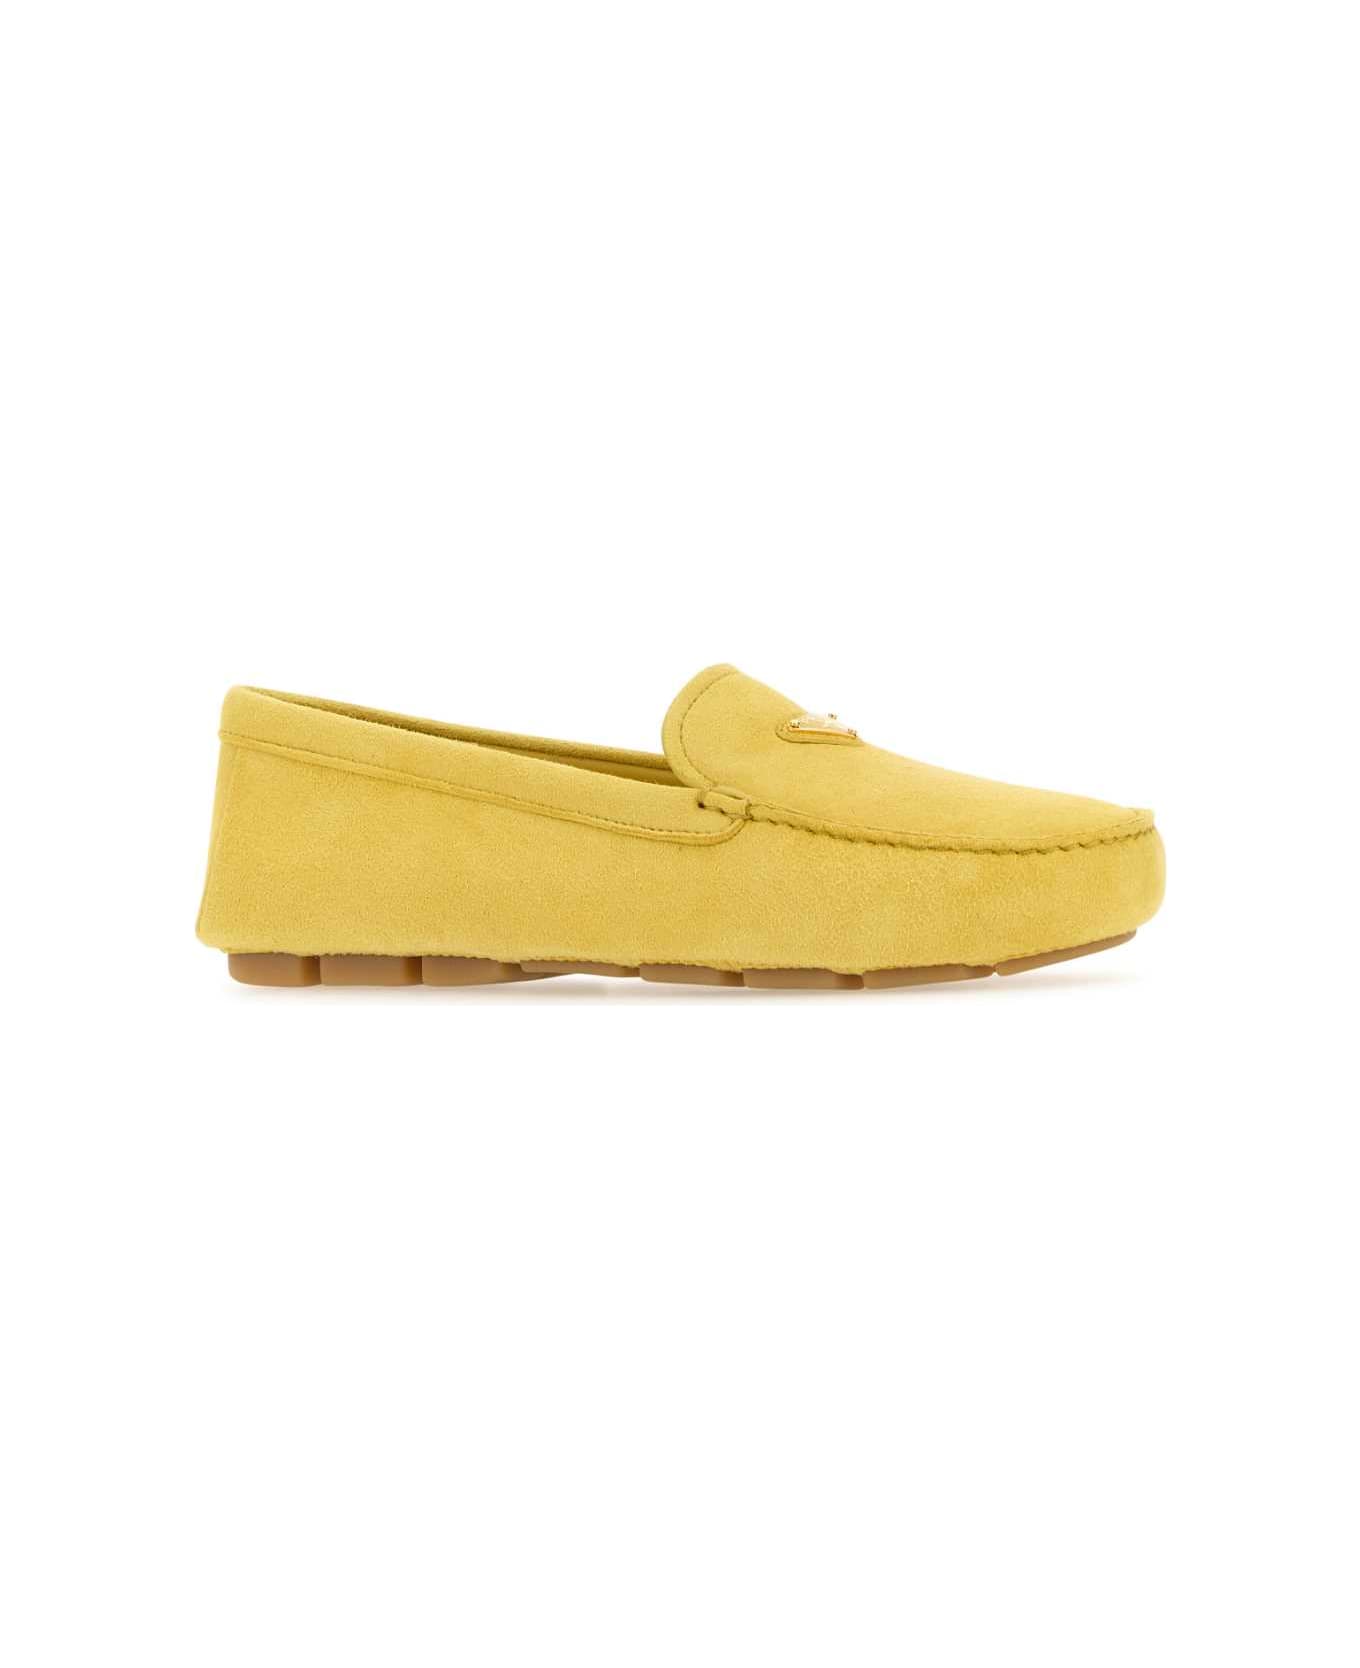 Prada Yellow Suede Loafers - SOLE